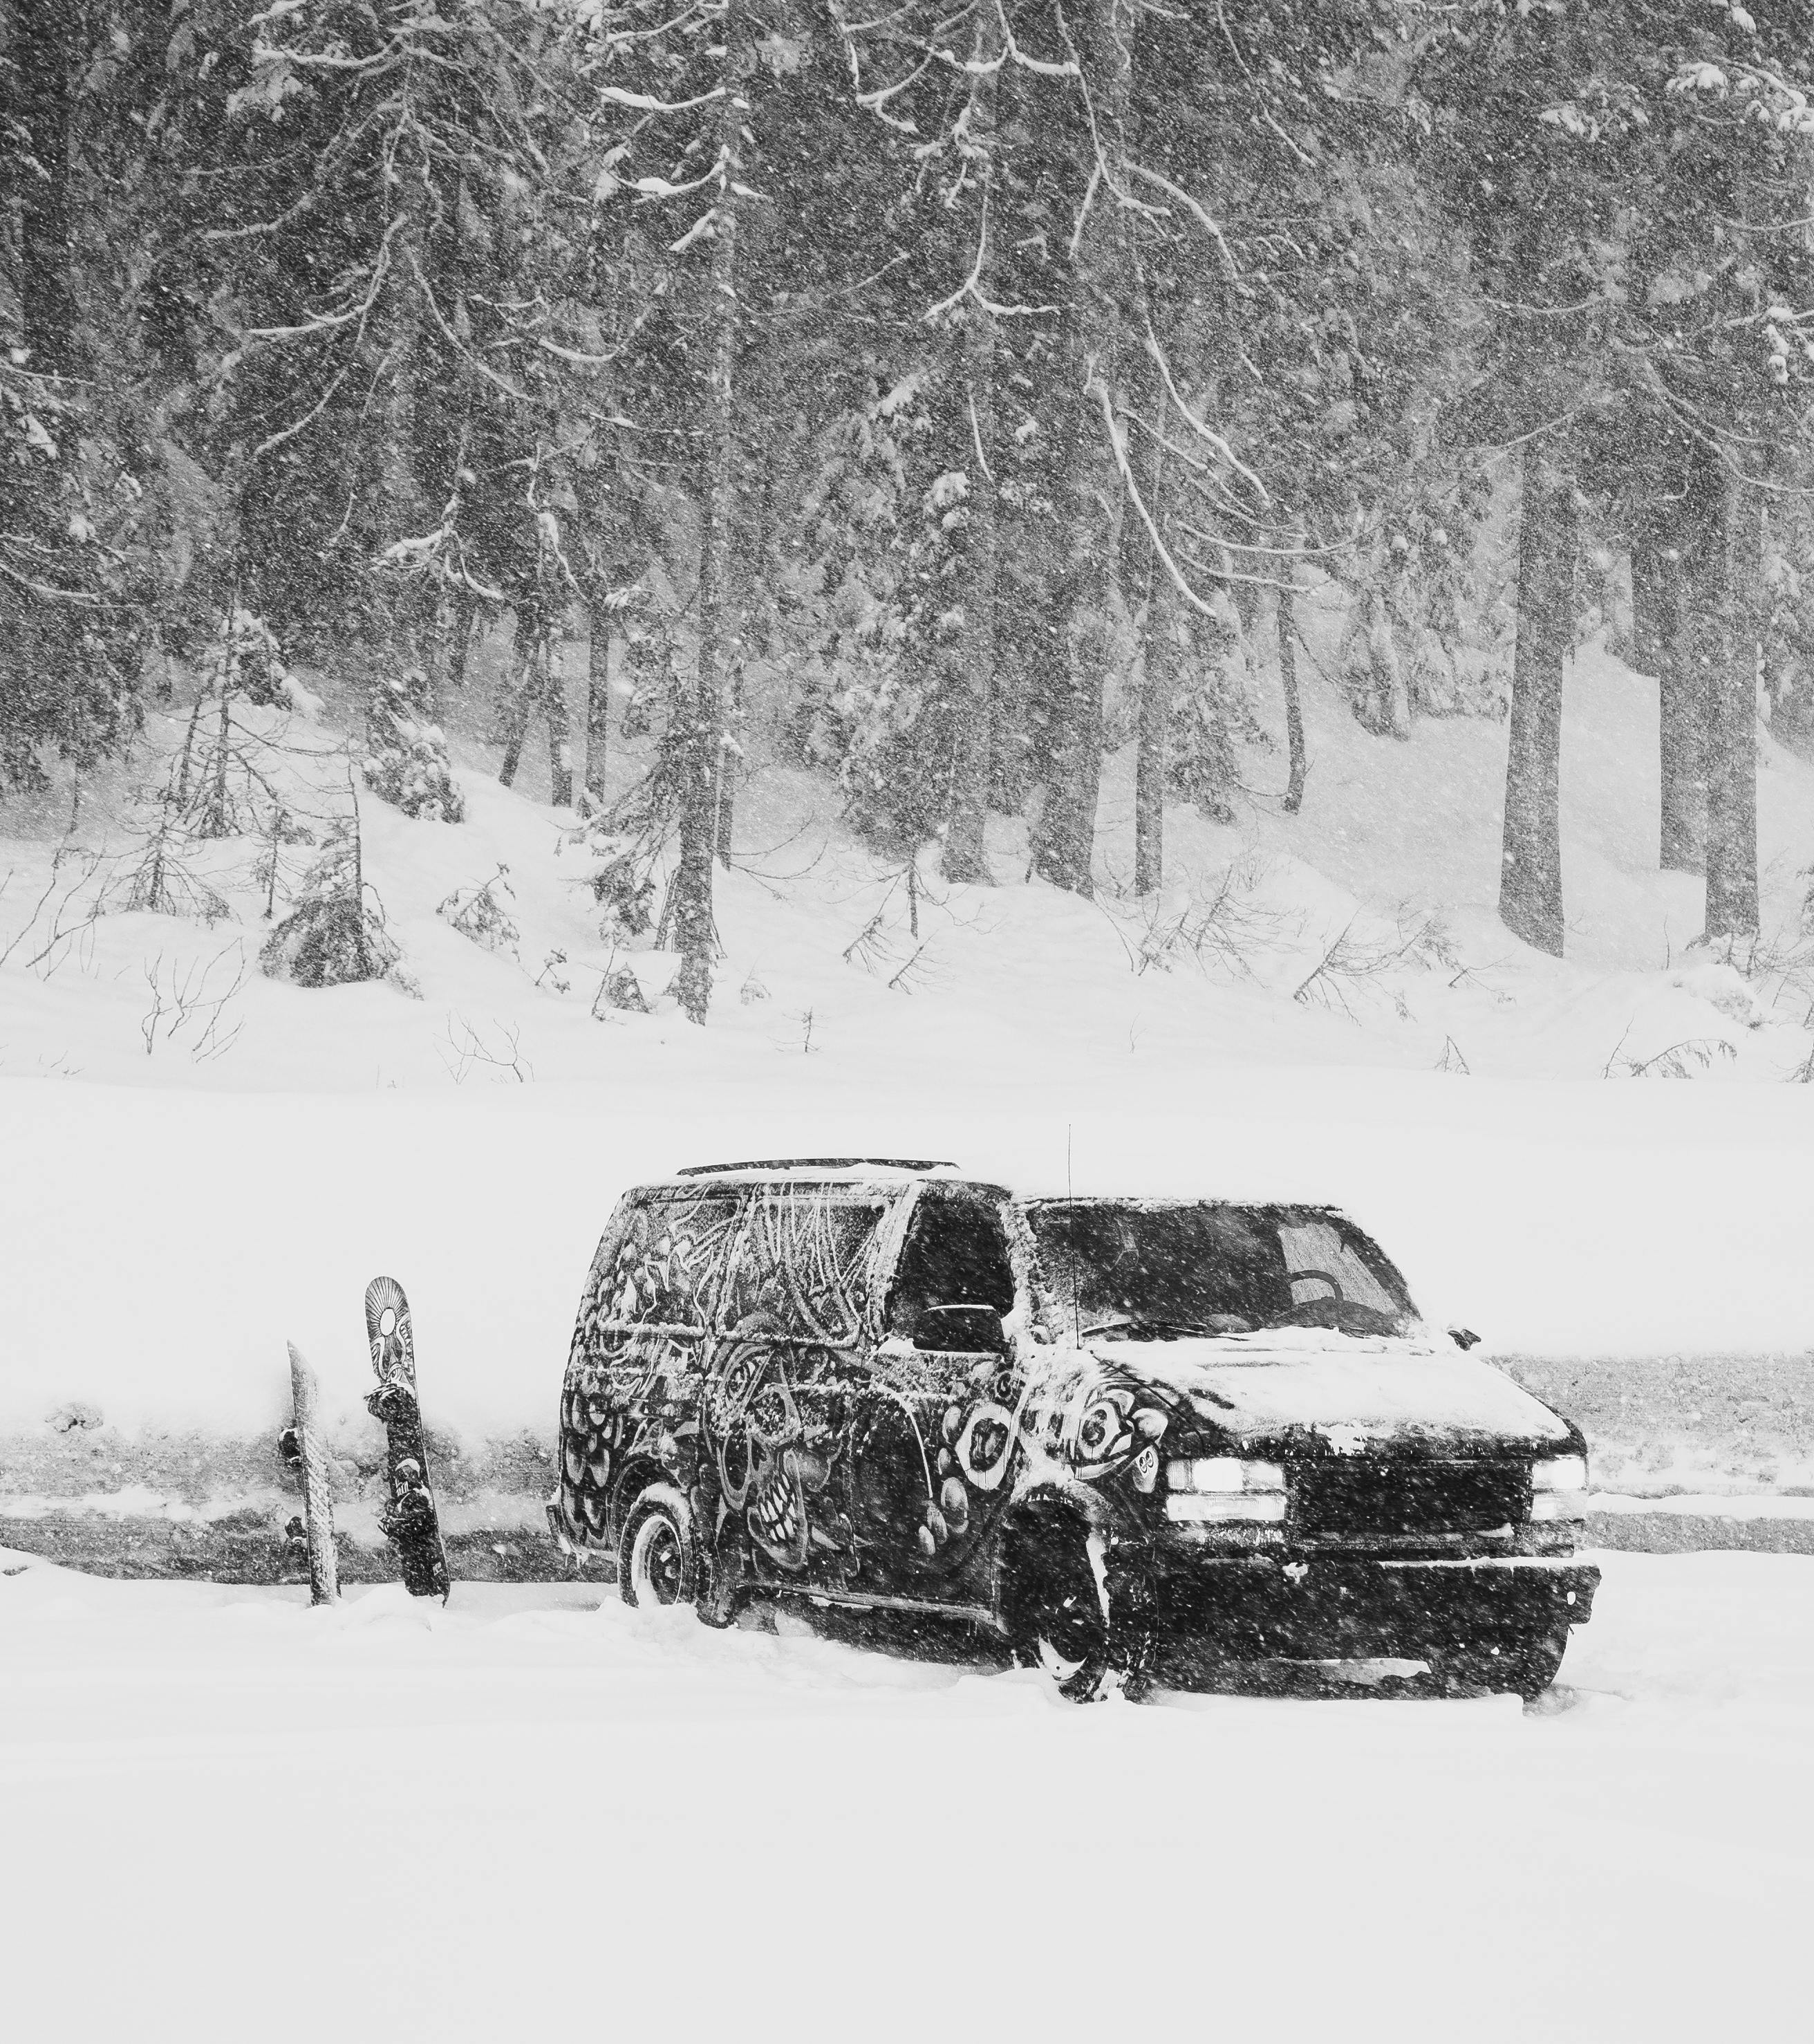 A van is parked in a snowy area with a snowboard next to it.